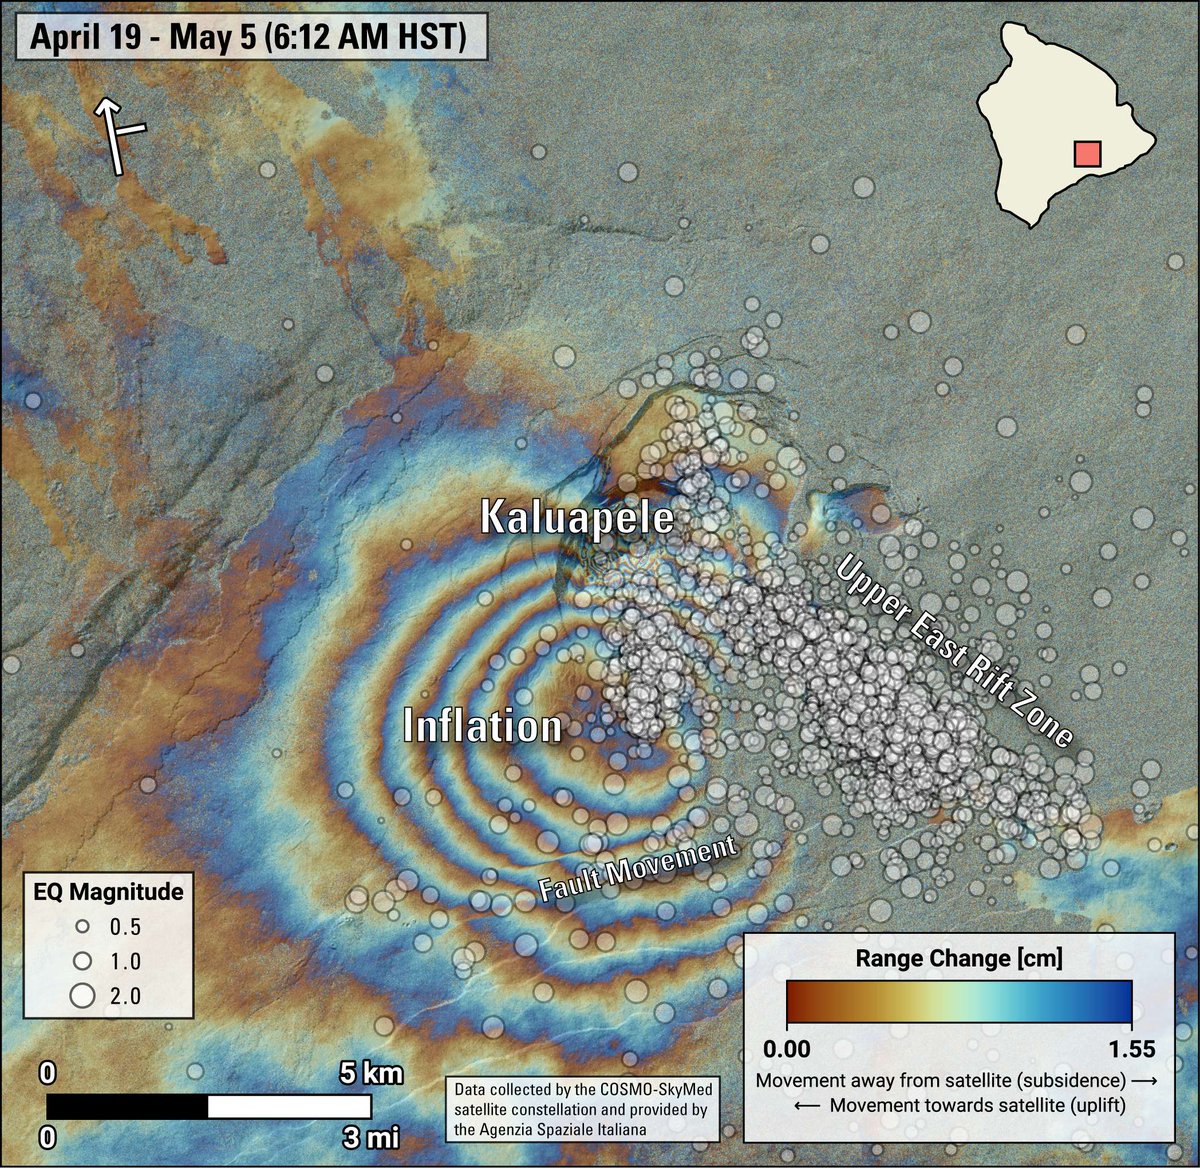 This COSMO-SkyMed satellite radar interferogram indicates inflation in the south part of Kaluapele (Kīlauea's summit caldera) during April 19 - May 5. Each colored fringe indicates 1.5 cm (0.6 in) of ground motion. More fringes = more deformation. White circles are quakes. (1/2)